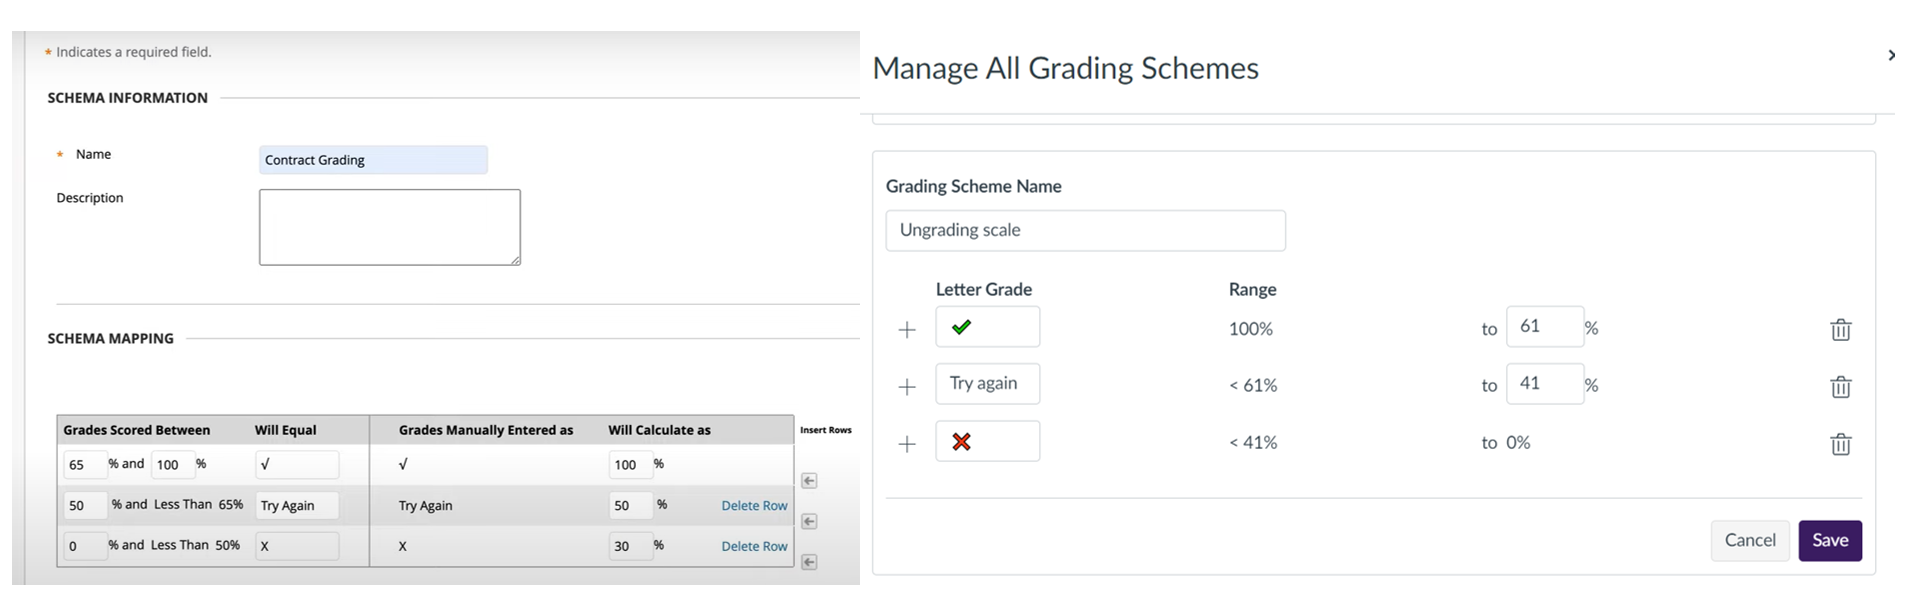 Picture 4 - Creating visual markers in Blackboard (left) and Canvas (right) - in Blackboard grades between 65 and 100 will equal a checkmark and scores between 50 and 65 equal "try again". Between 0 and 50 are X. In Canvas, 61-100 are checkmark, 41-61 are "try again" and 0-41 are X